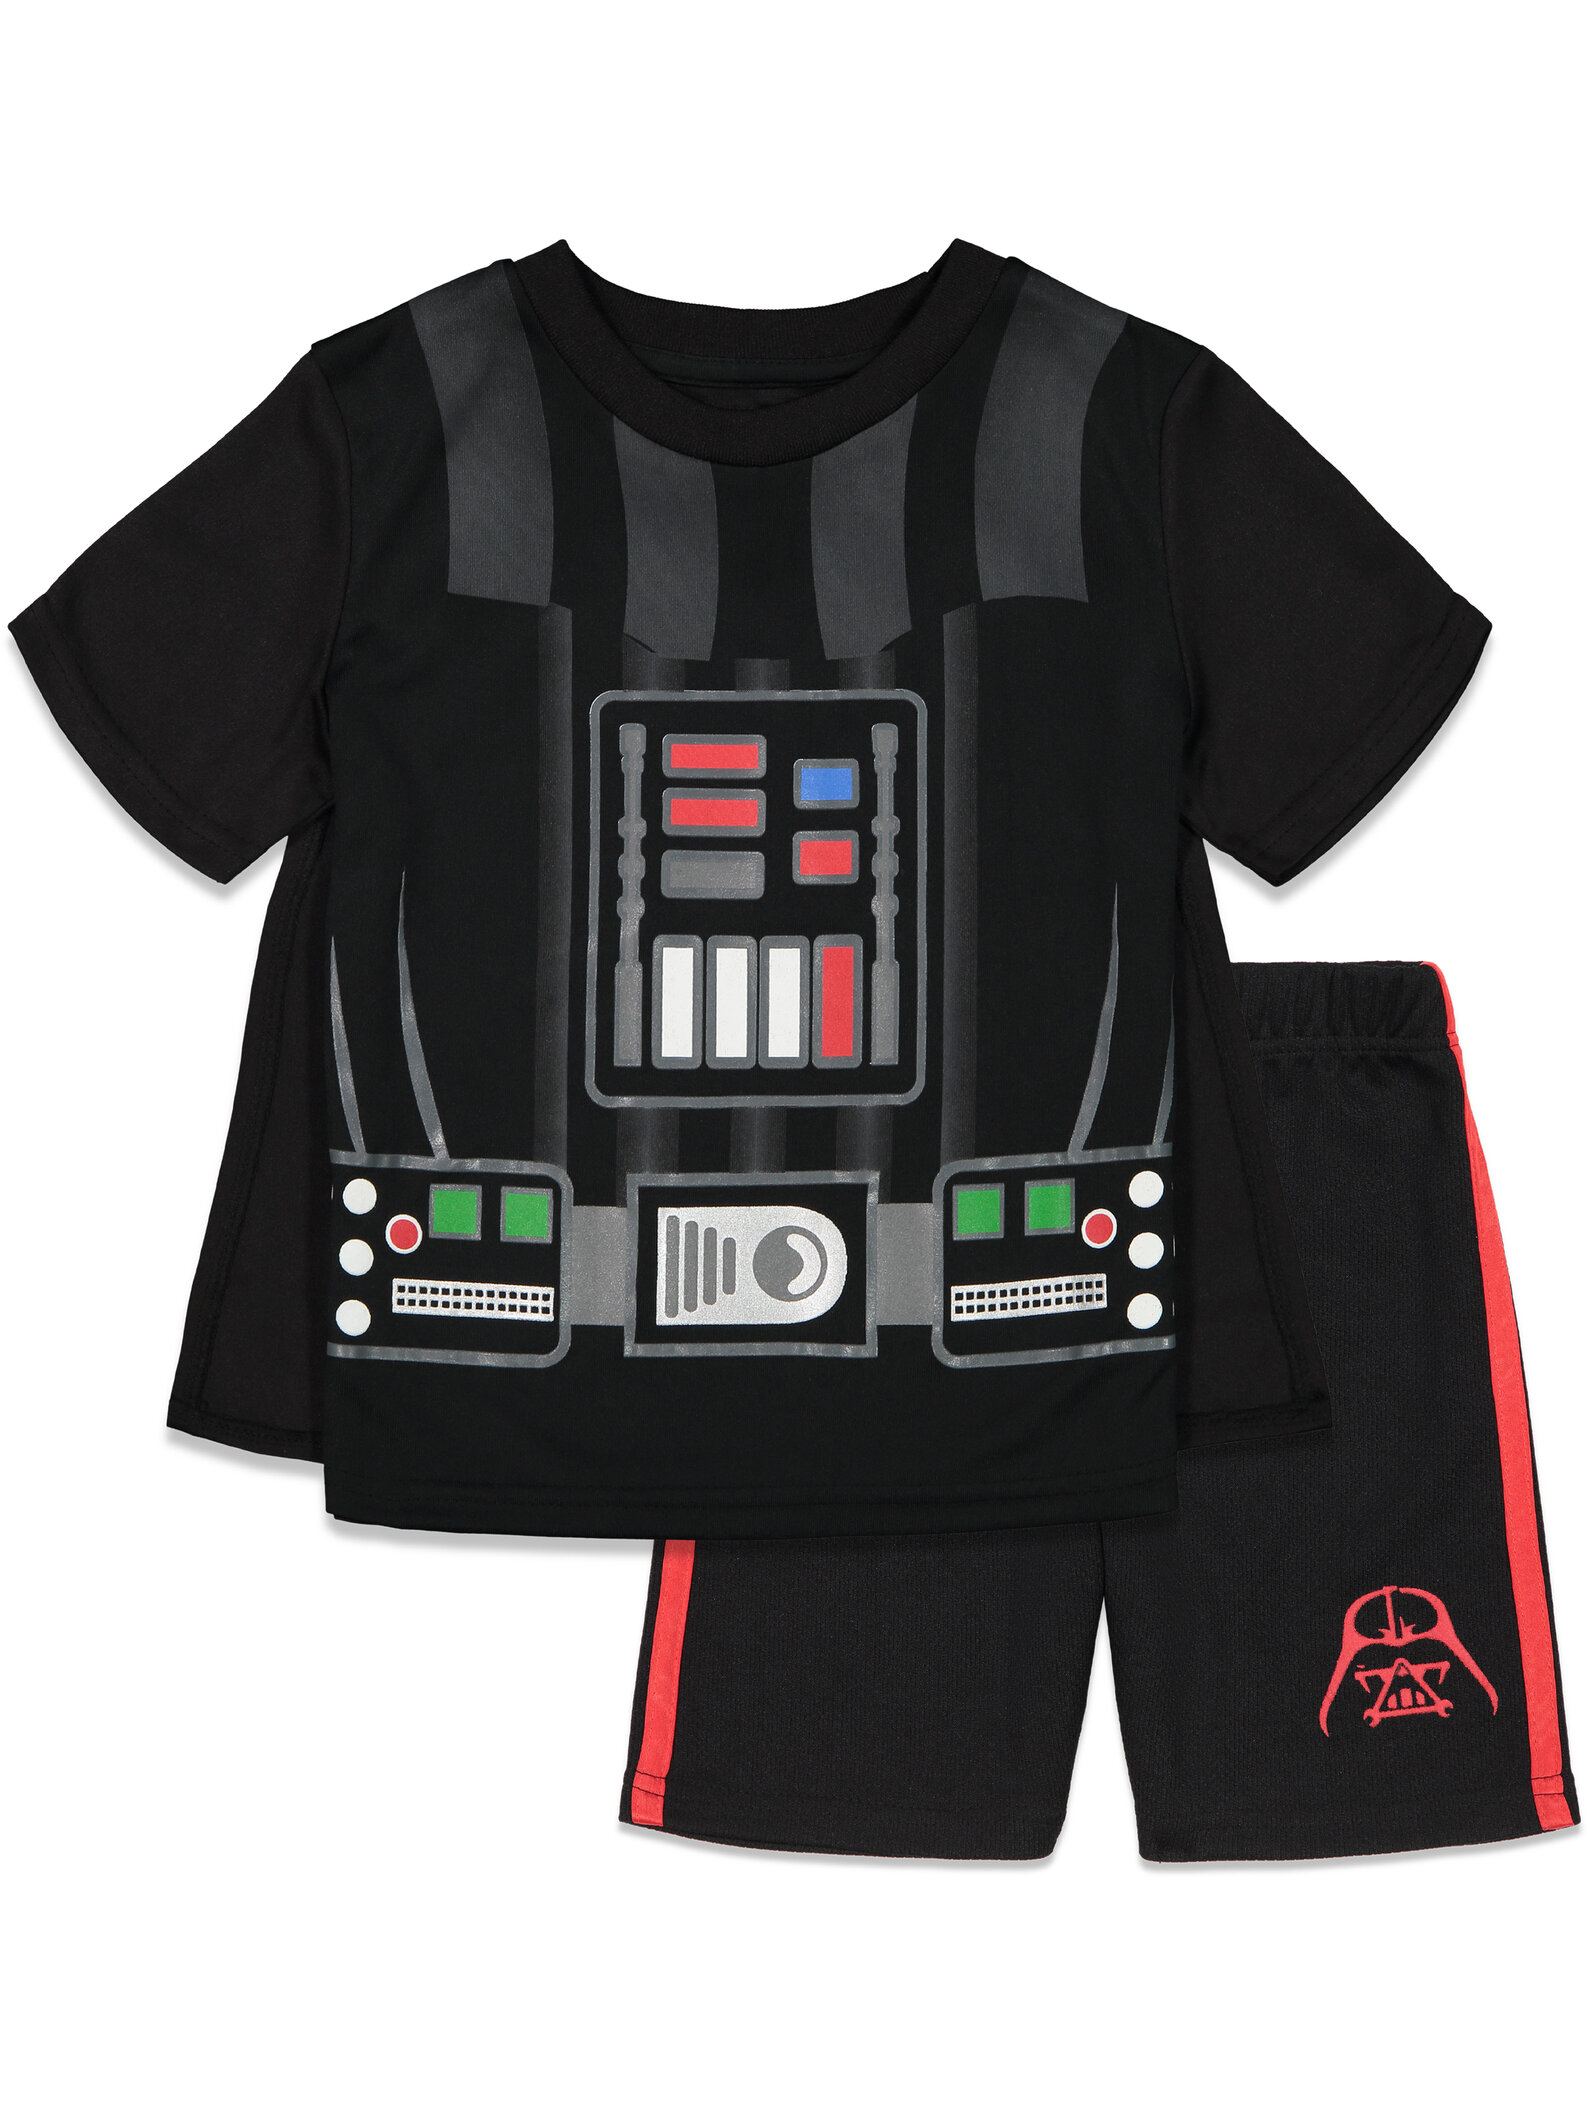 Star Wars Darth Vader Toddler Boys Costume T-Shirt Shorts and Cape 3 Piece Toddler to Big Kid - image 1 of 5